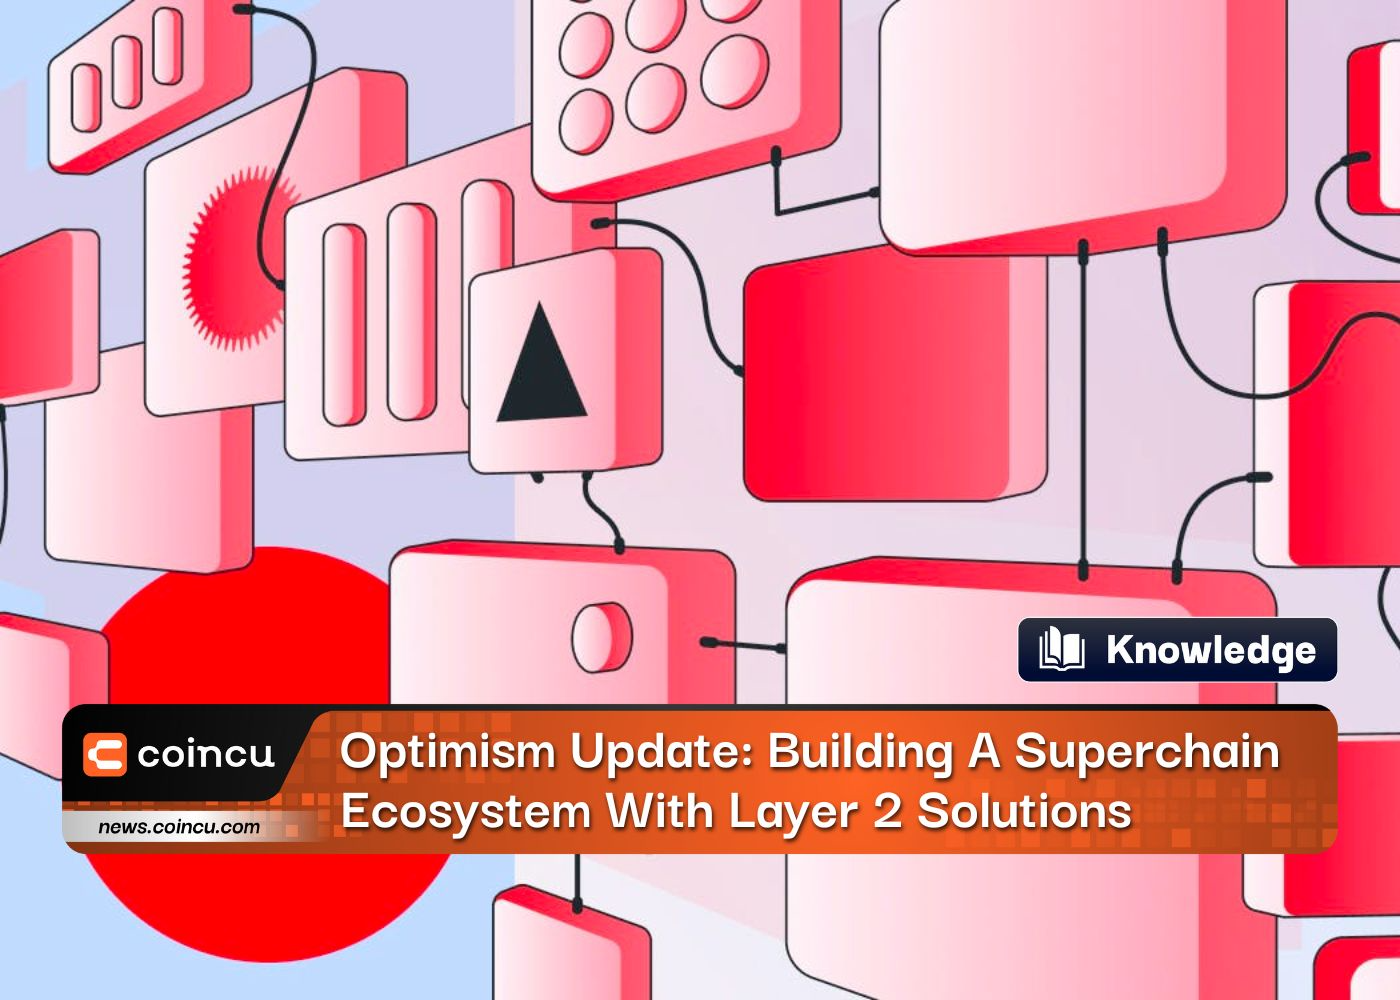 Optimism Update: Building A Superchain Ecosystem With Layer 2 Solutions